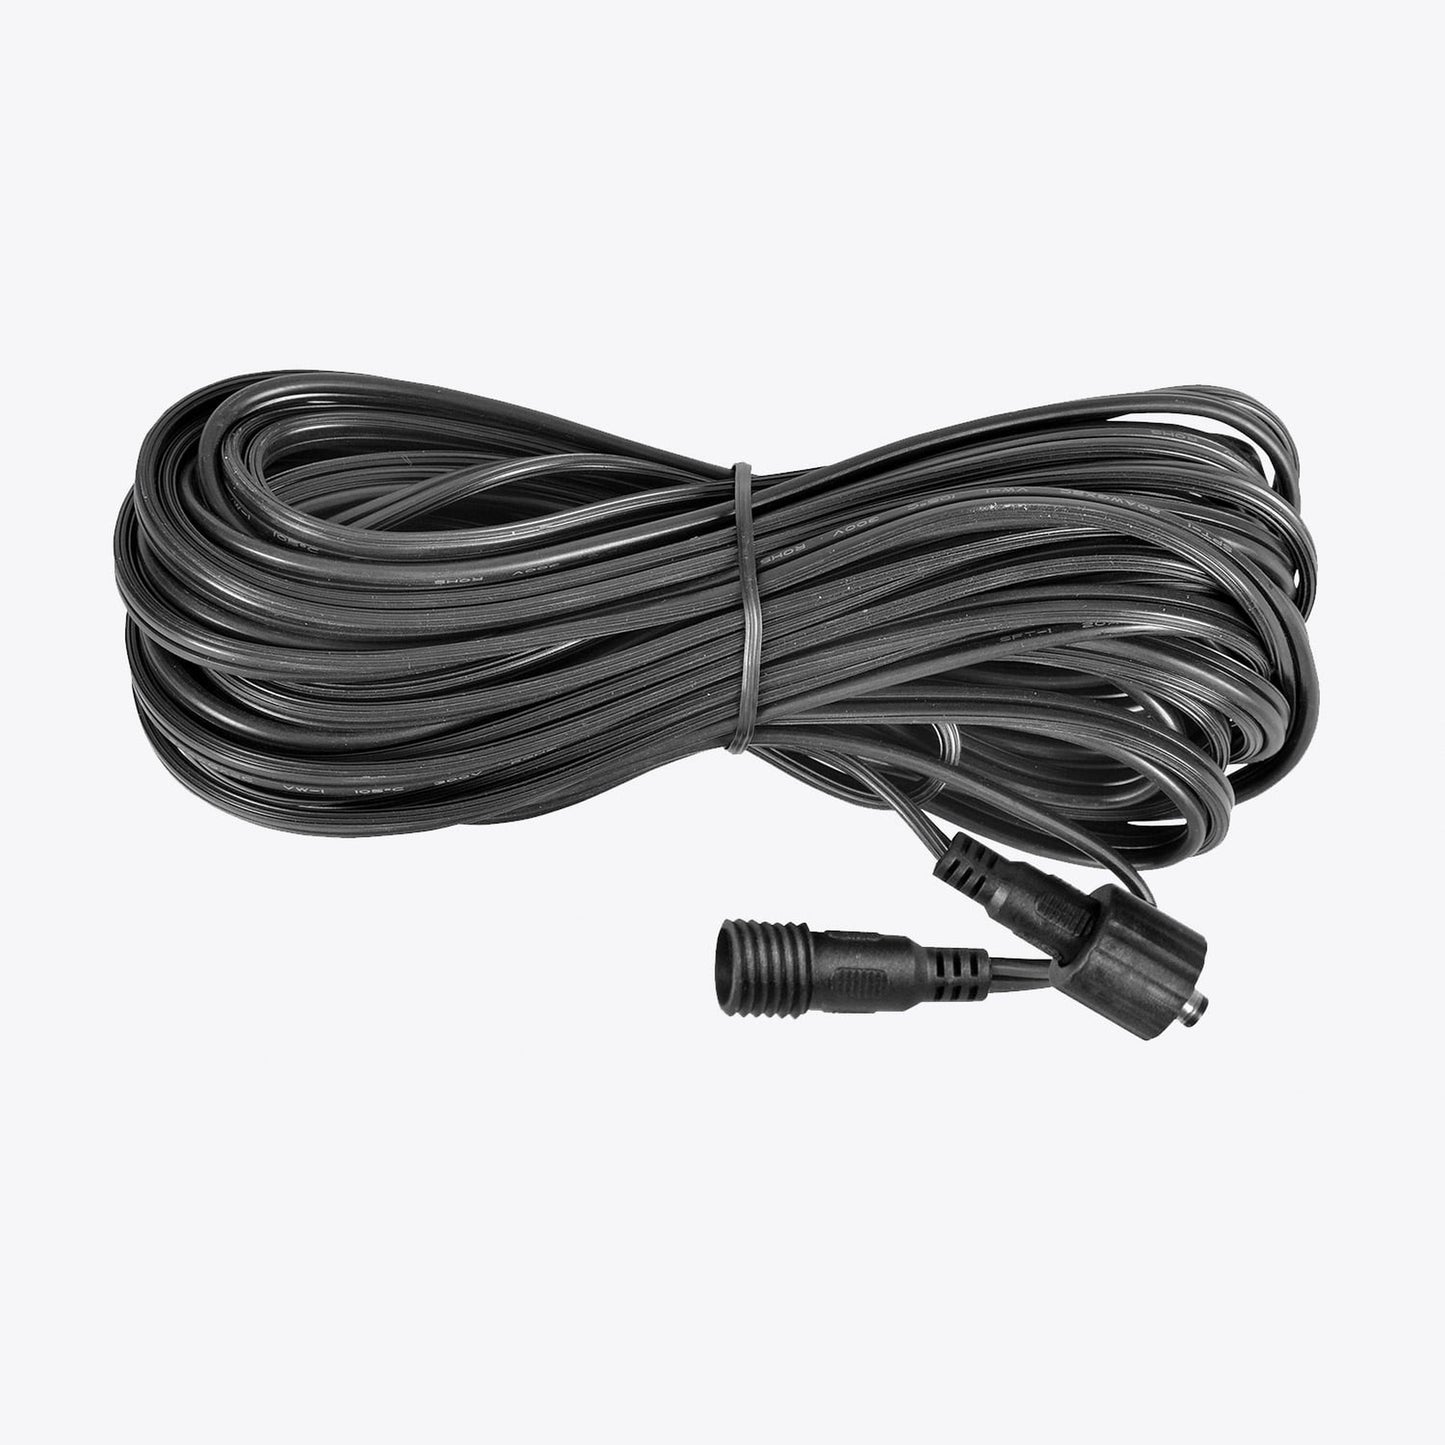 Hard Korr DC Extension Cable 10m